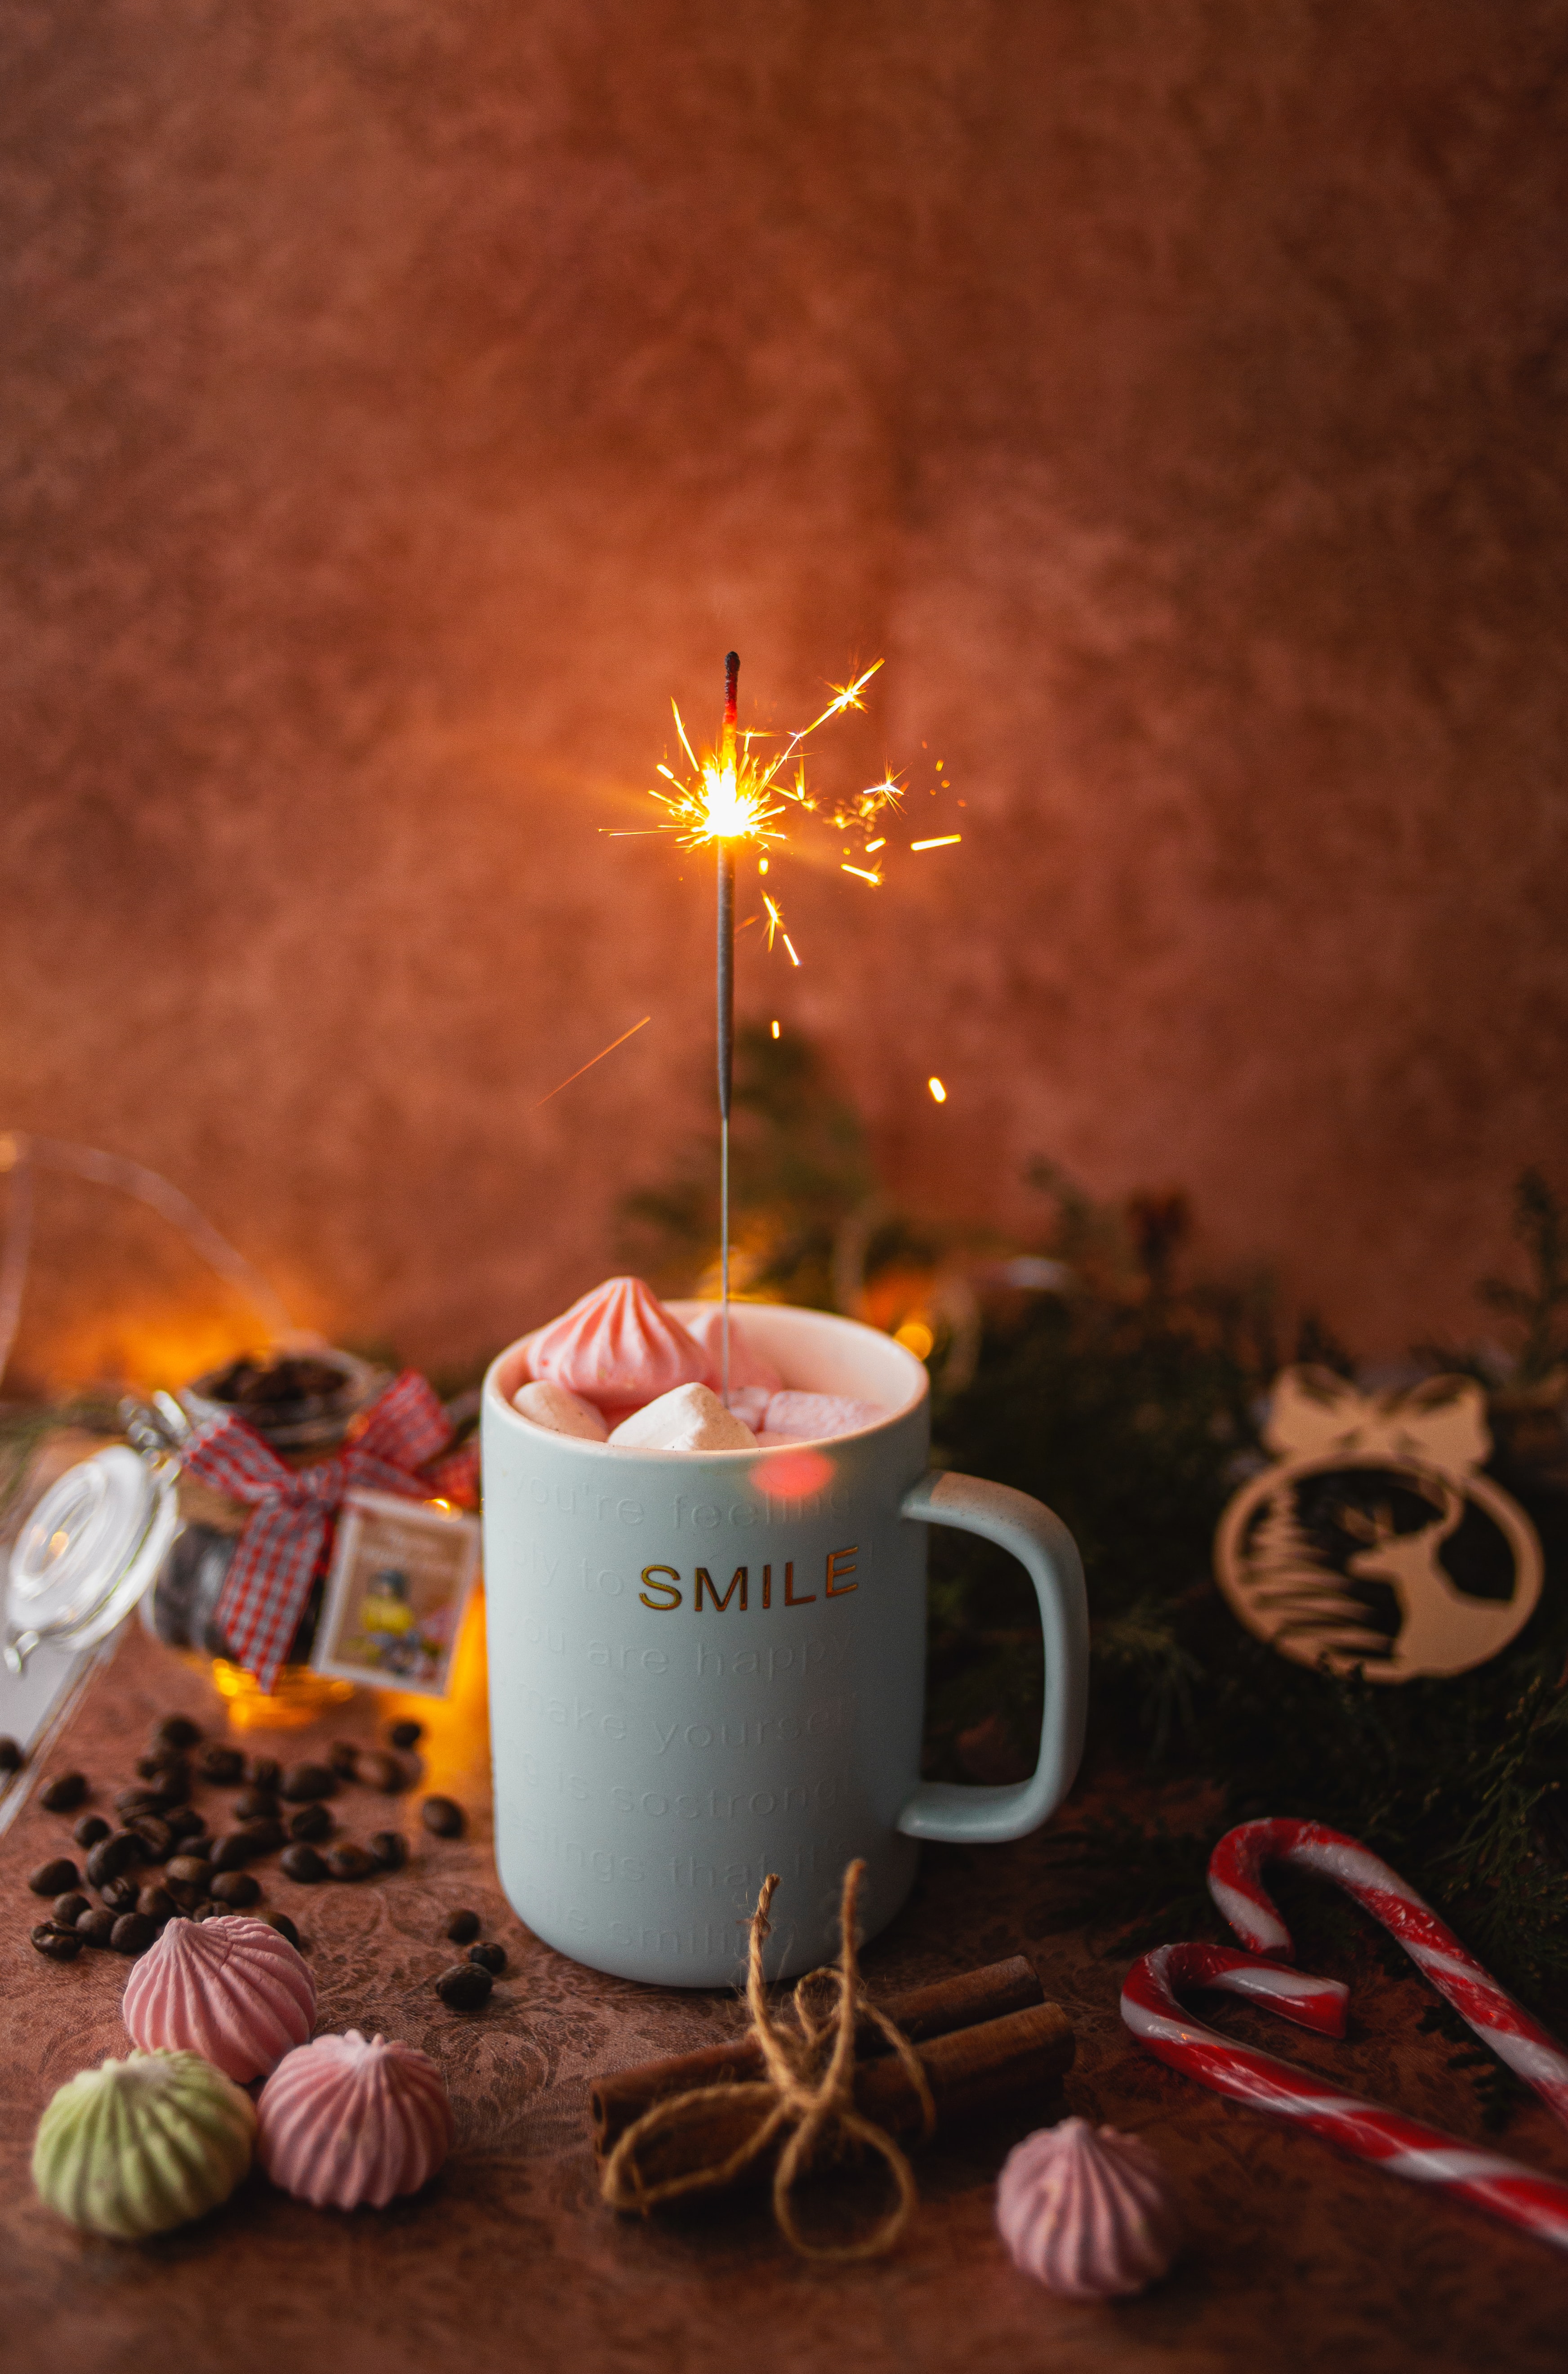 miscellanea, mug, holiday, sparks, cup, miscellaneous, marshmallow, bengal lights, sparklers, zephyr QHD